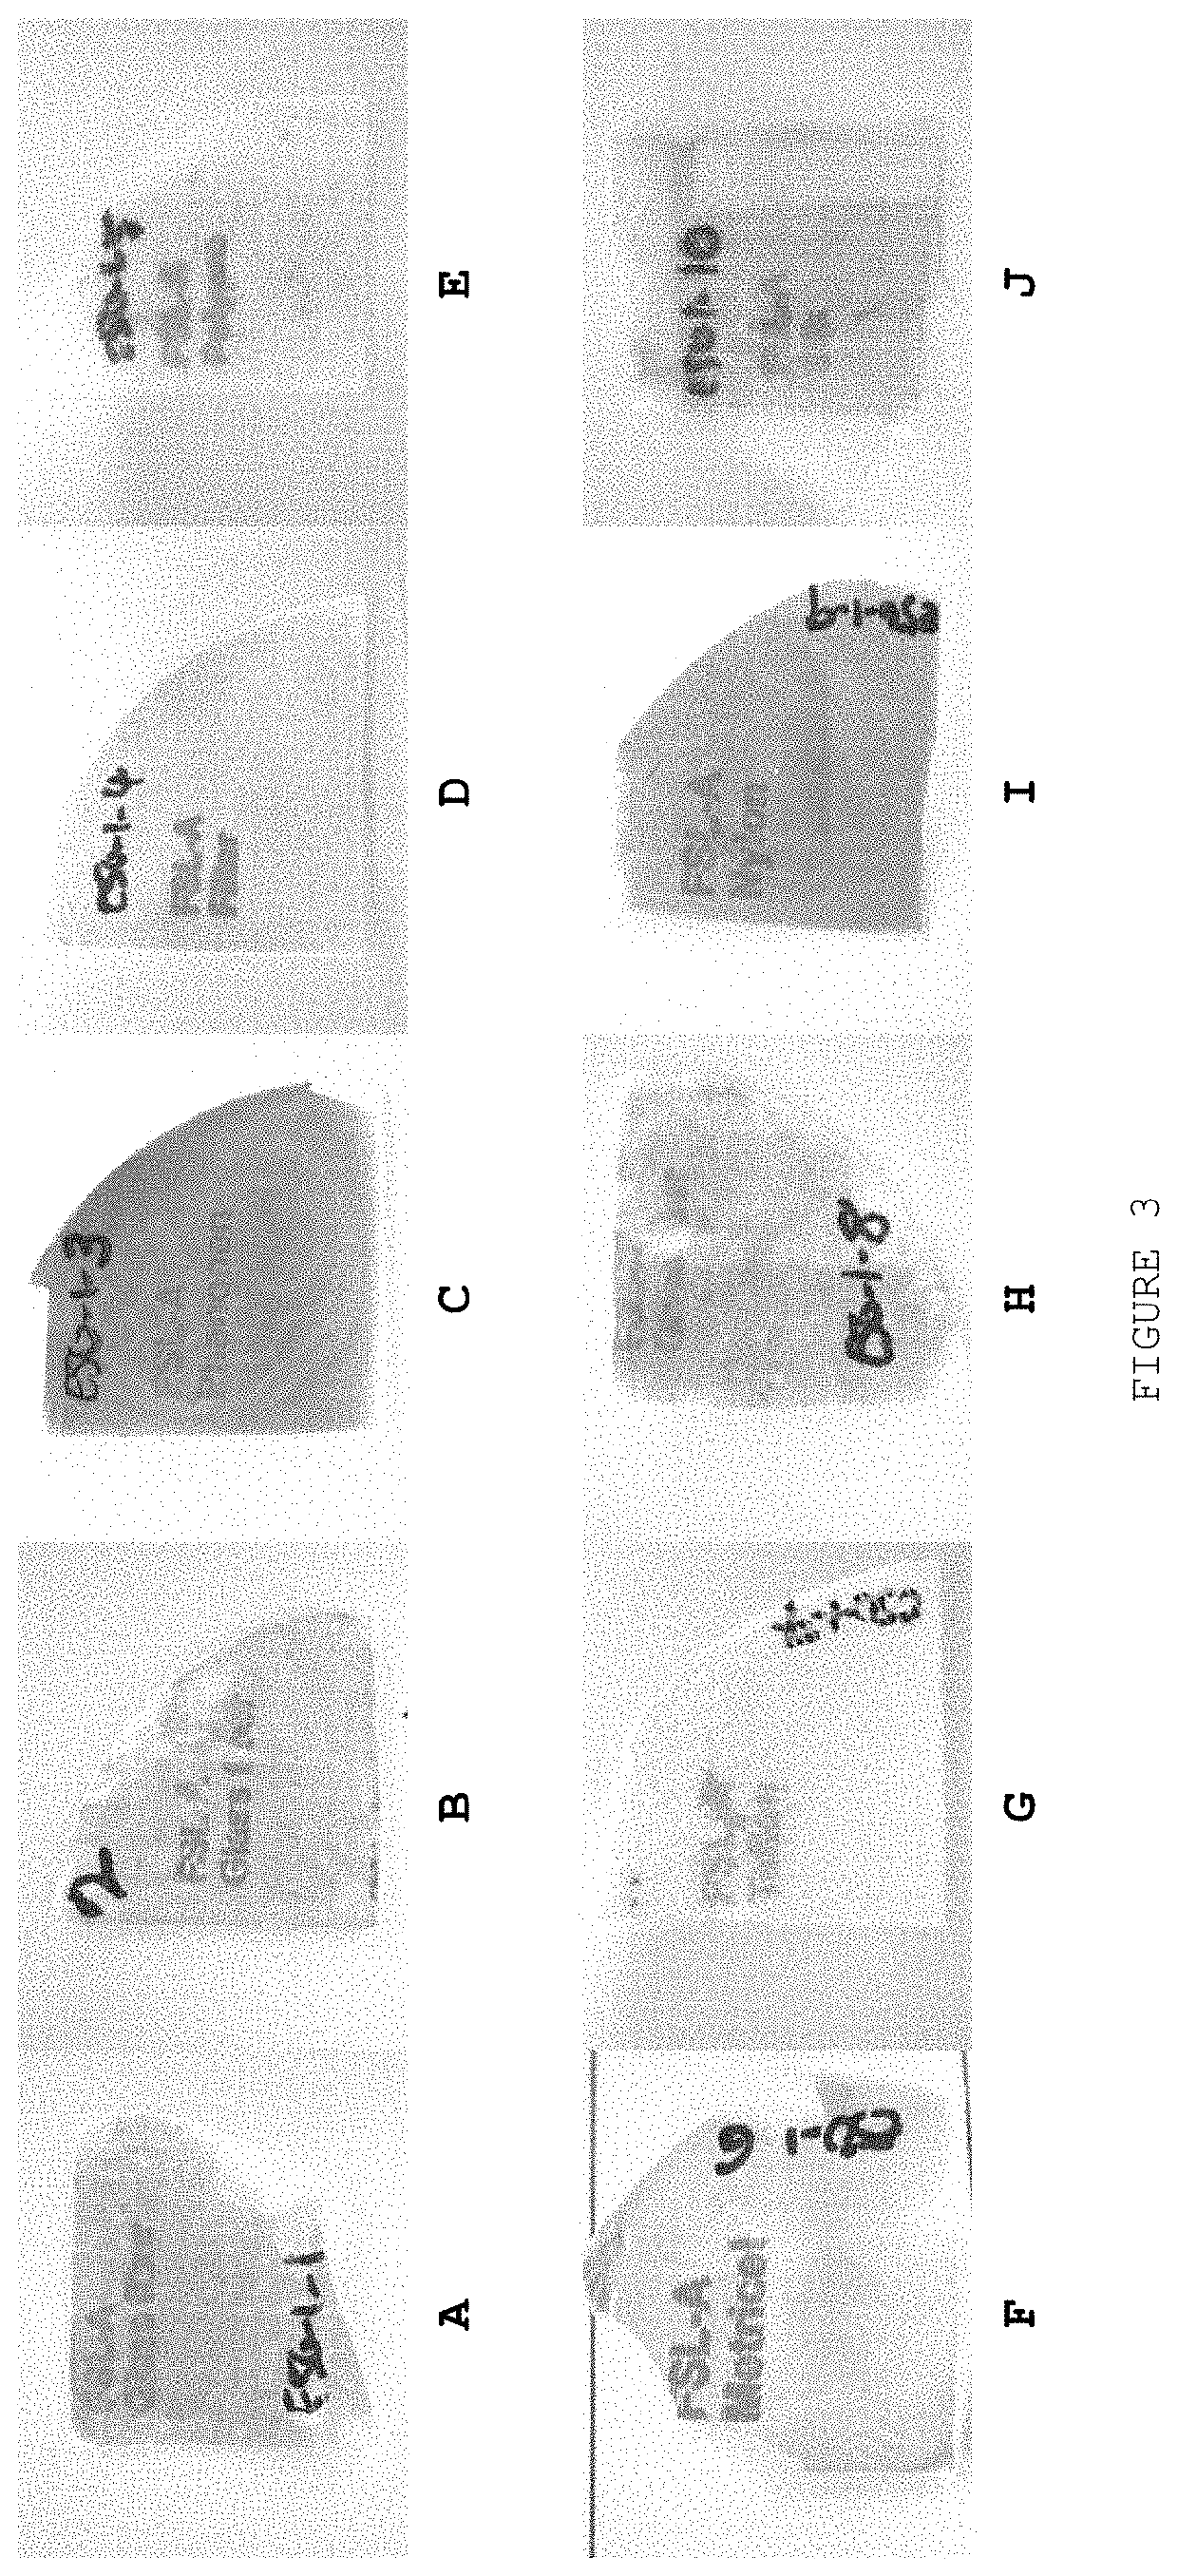 Biocompatible method of functionalising substrates with inert surfaces